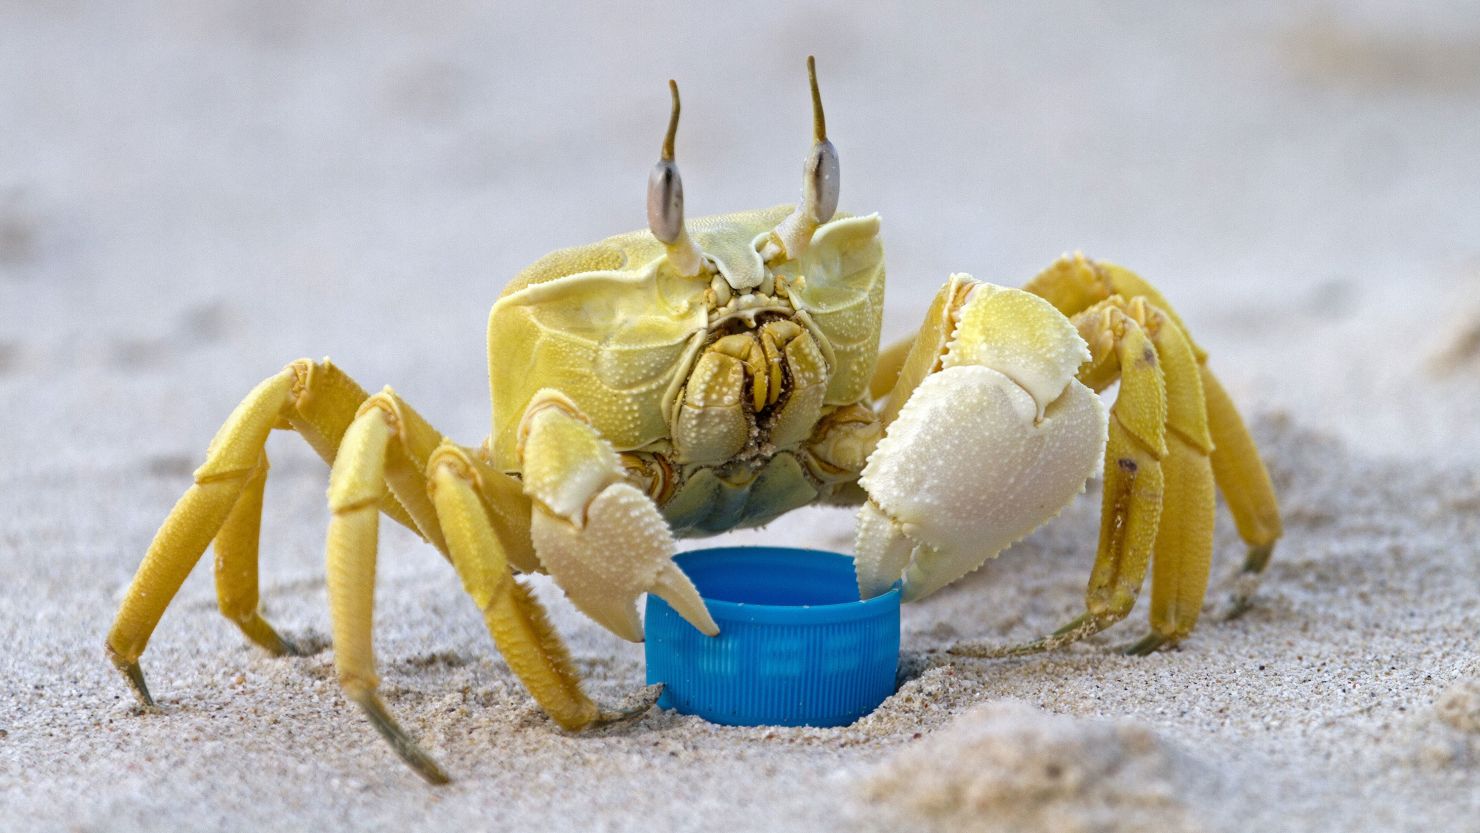 Researchers studied the ghost crab and found that it could produce a "rasping sound" by "grinding the teeth of the foregut."